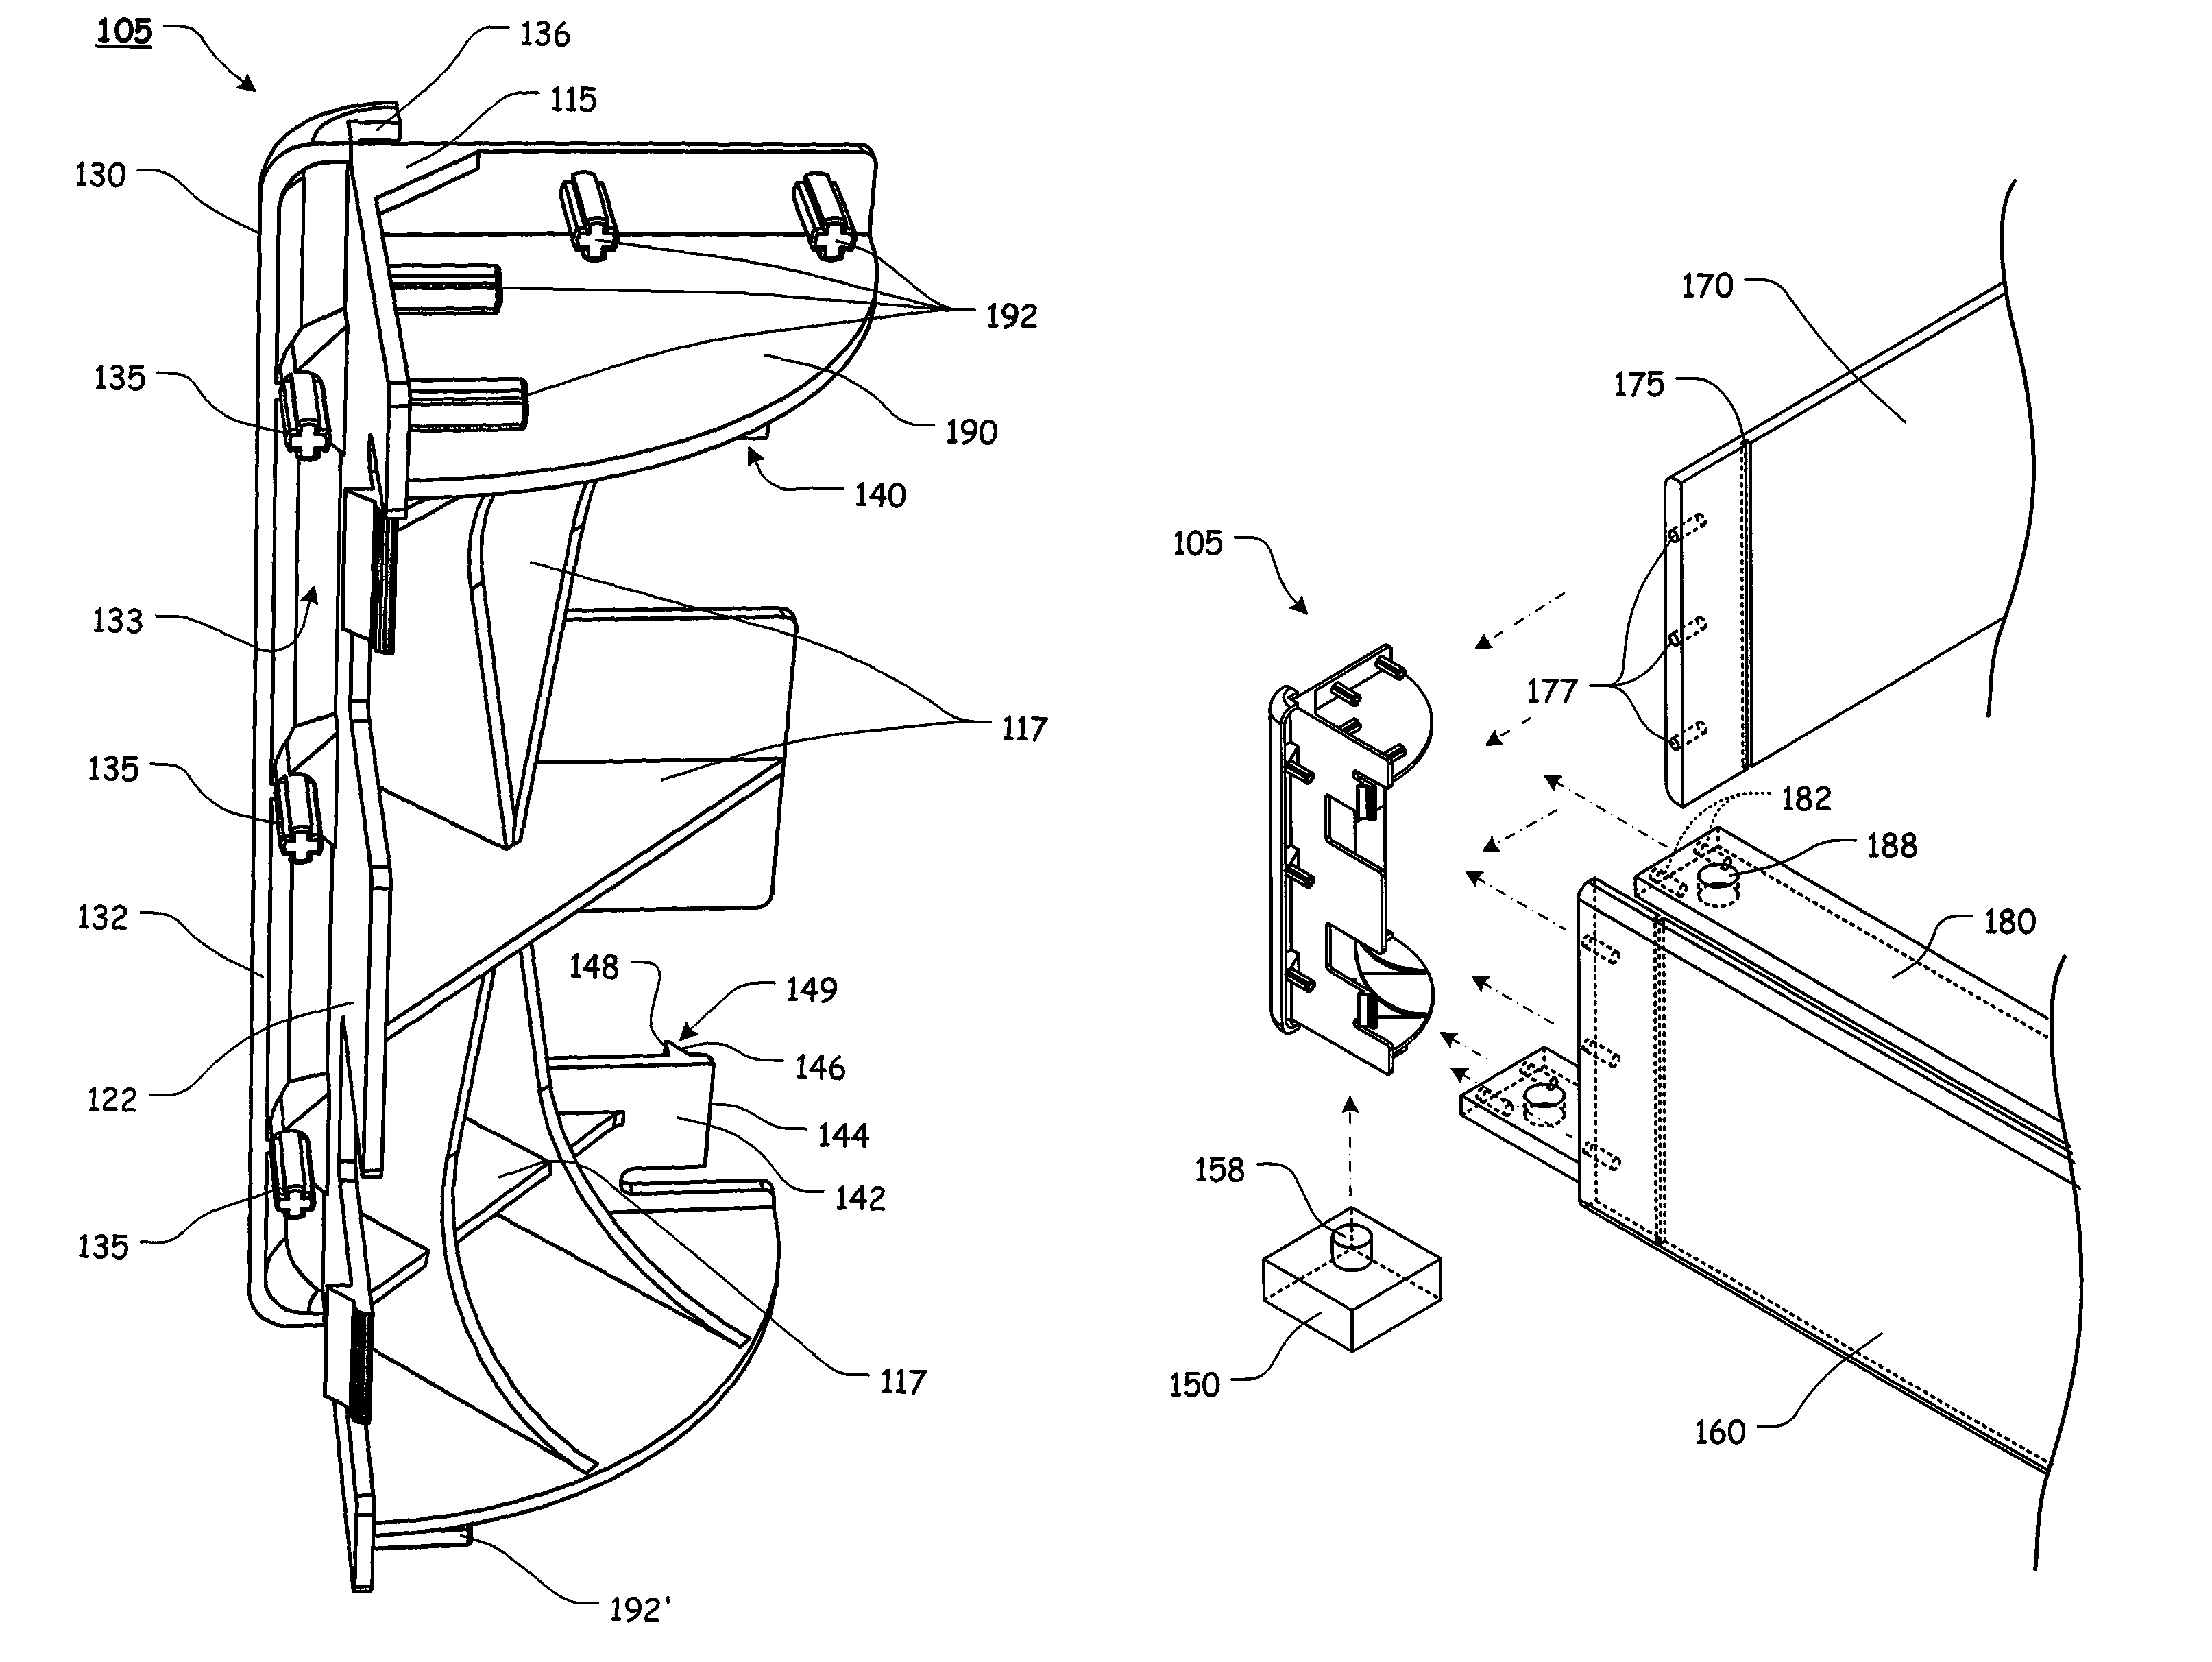 Connector element with tang fixation and associated frame assembly with support slats